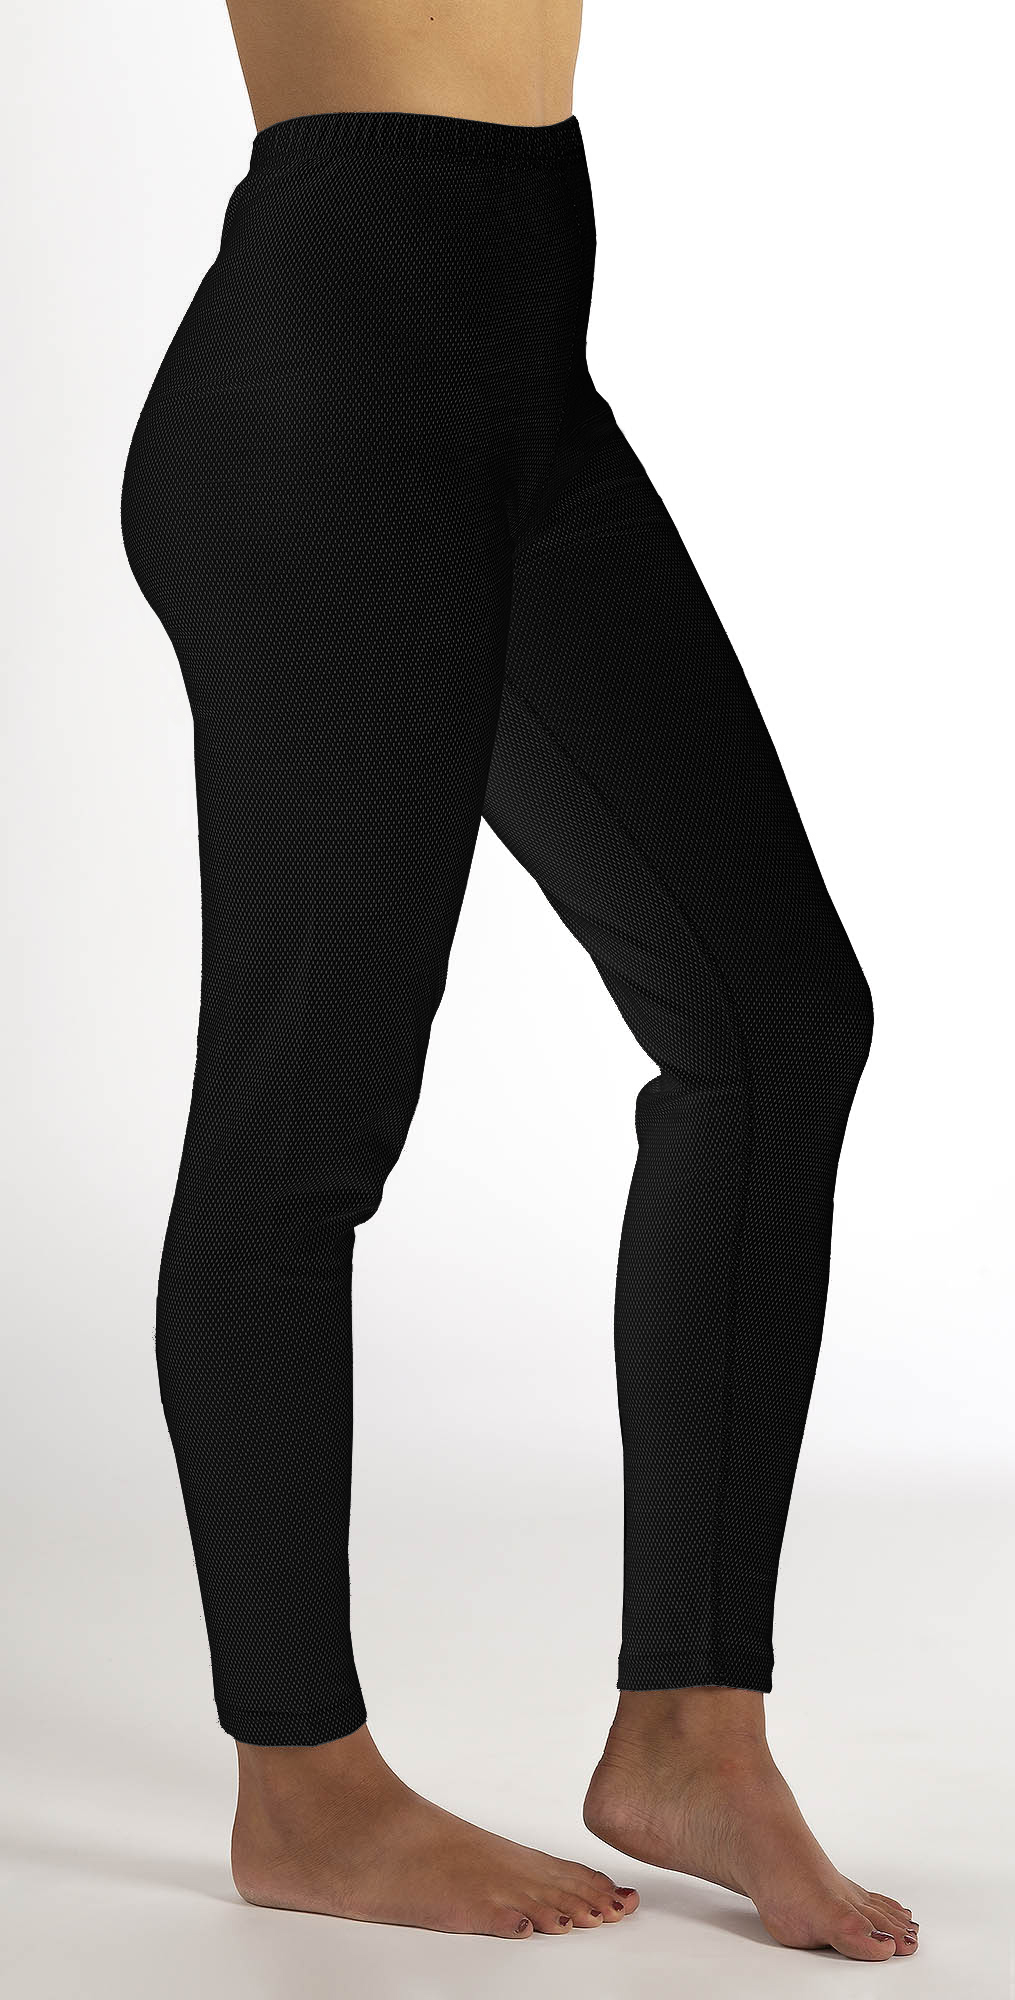 Ladies Leggings black organic cotton with silver knitted fabric